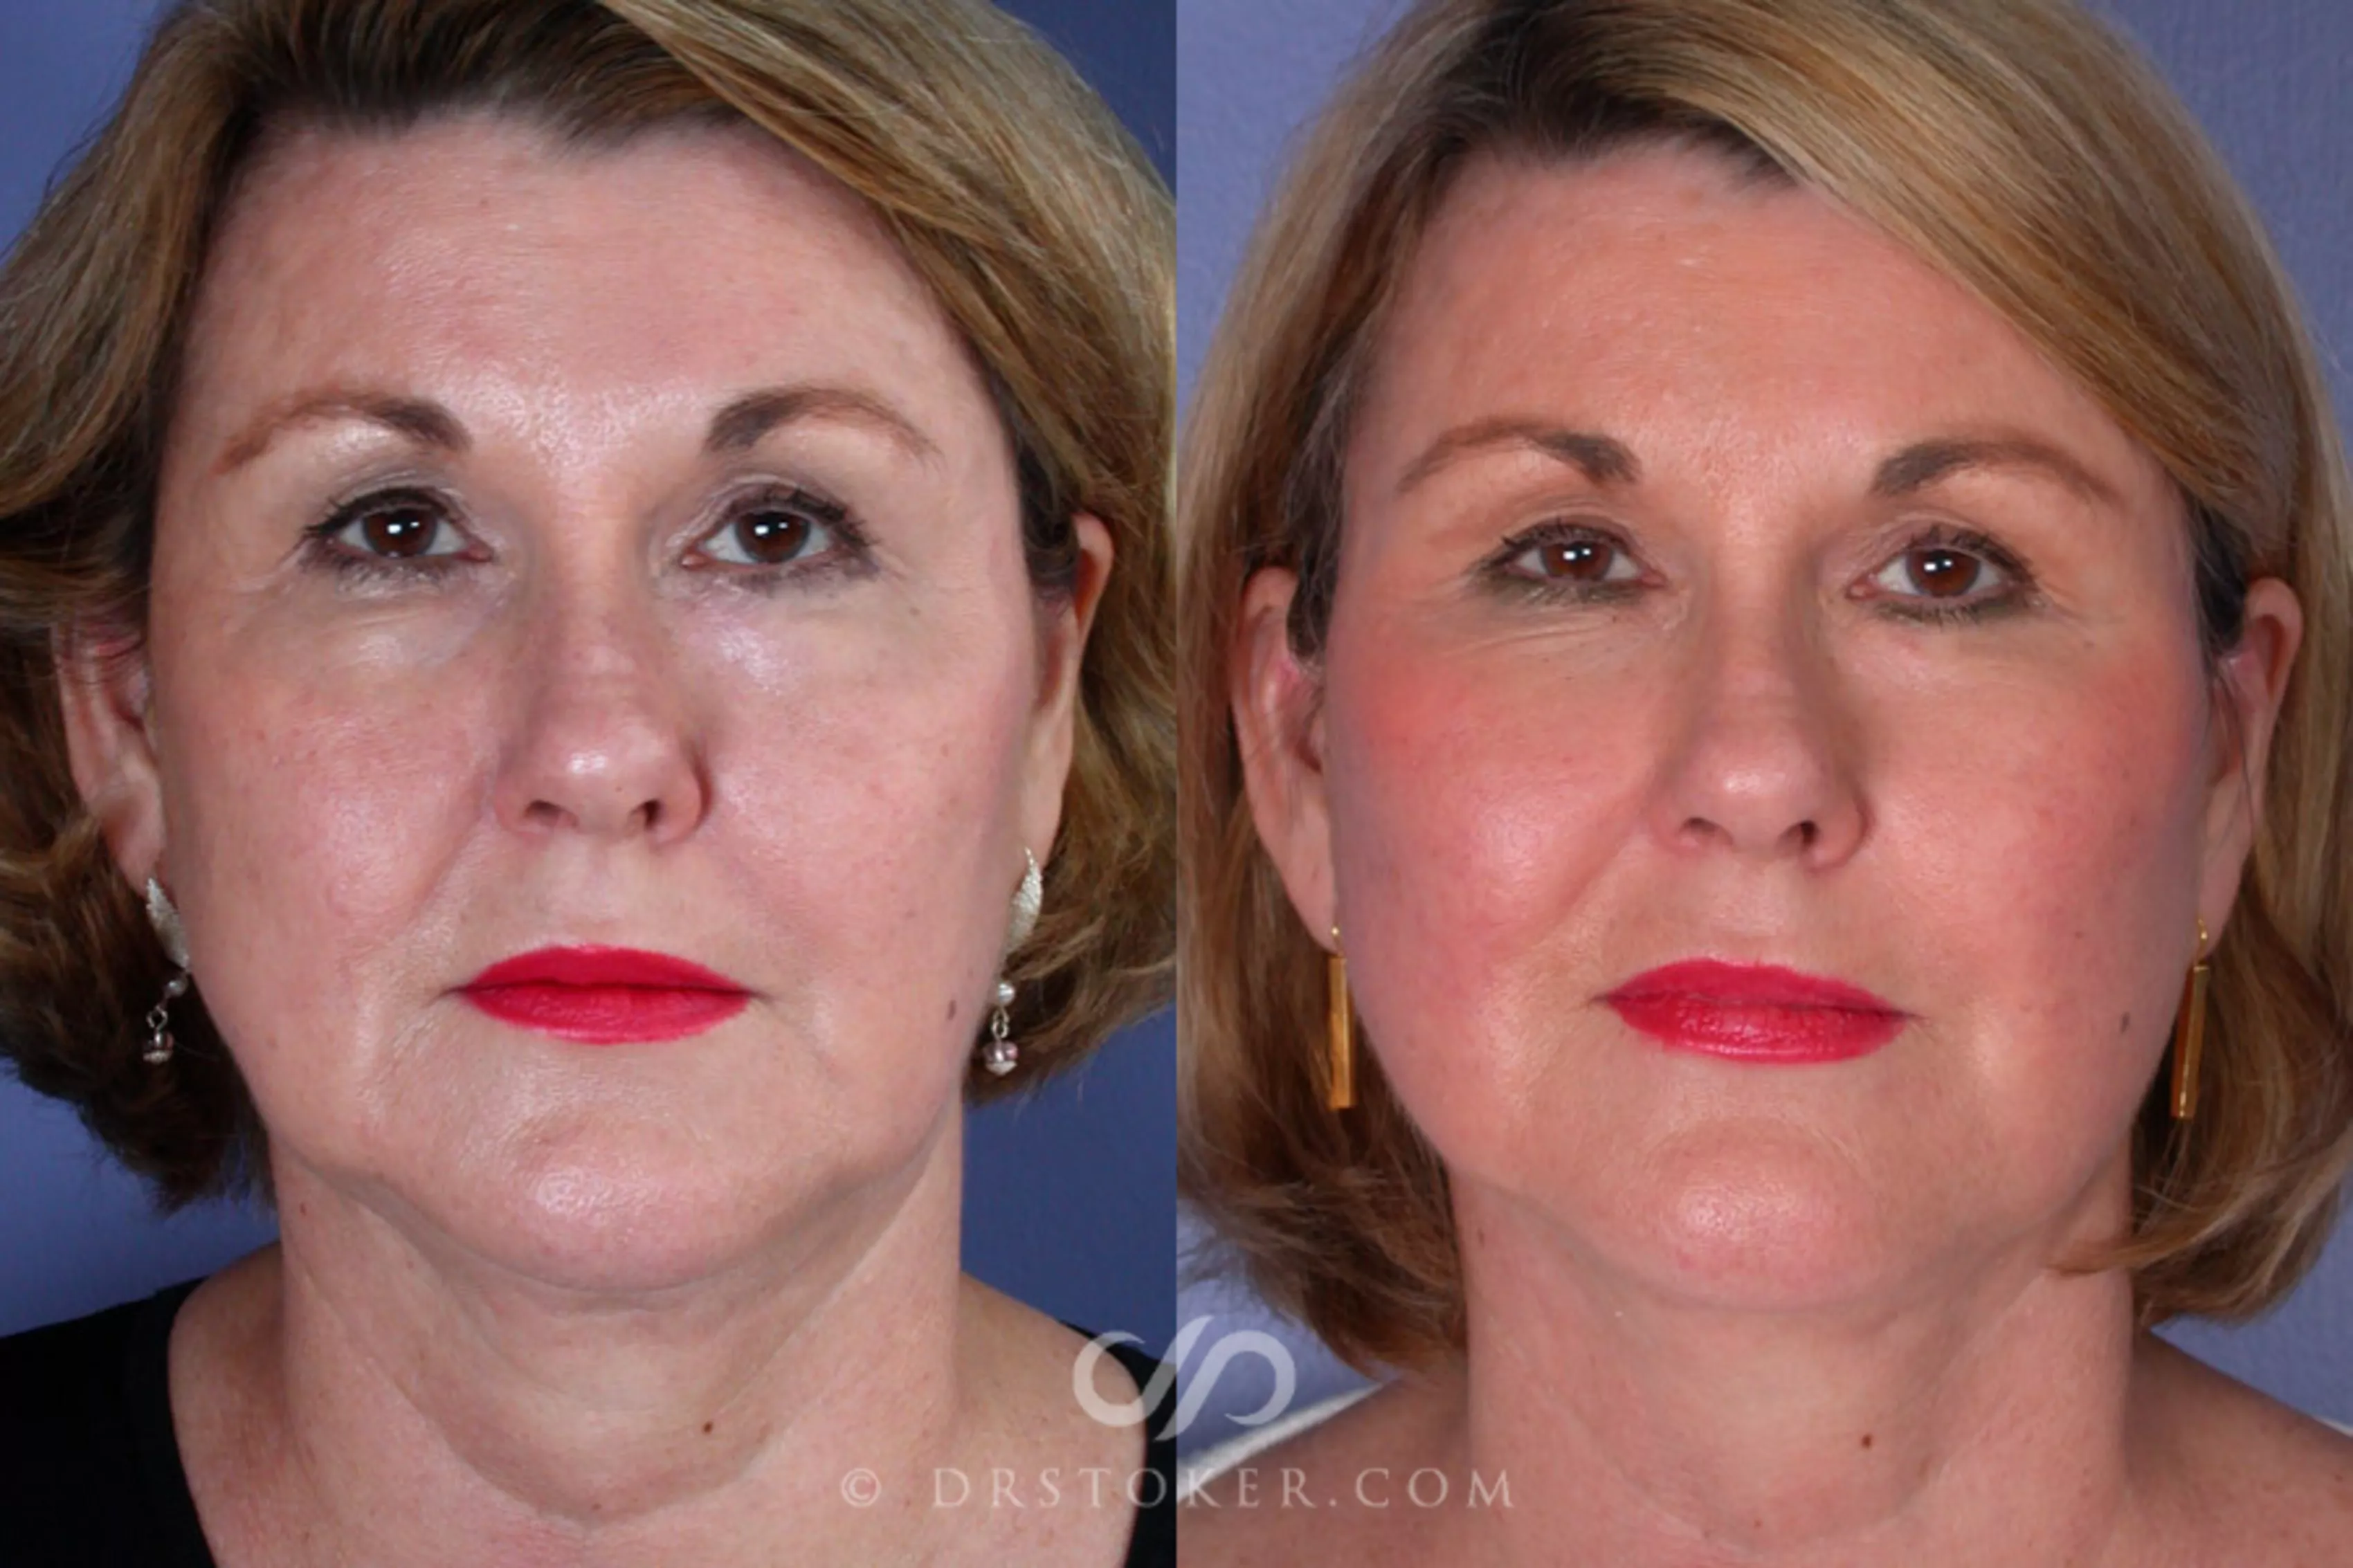 8 Facelift Before-and-After Photos That Prove Just How Natural Today's  Results Look – TLKM Plastic Surgery